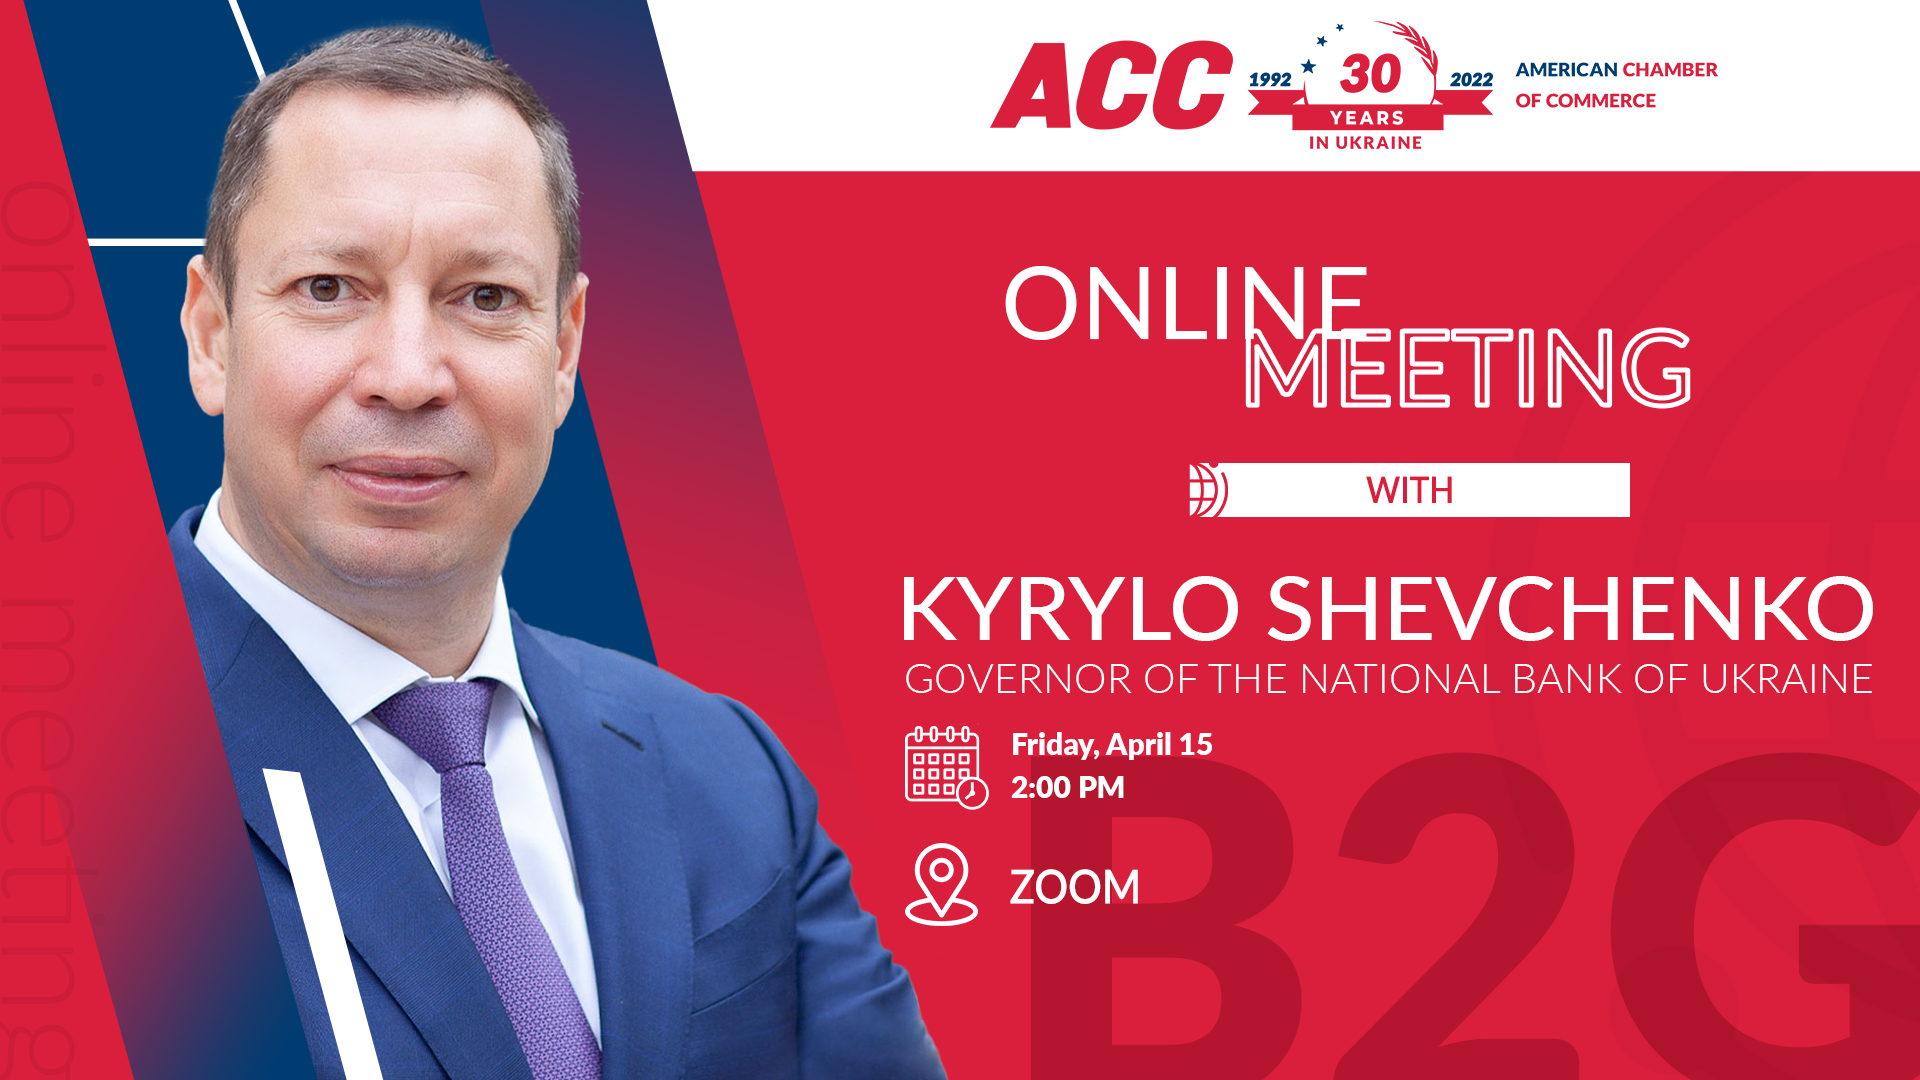 Online Meeting with Kyrylo Shevchenko, Governor of the National Bank of Ukraine